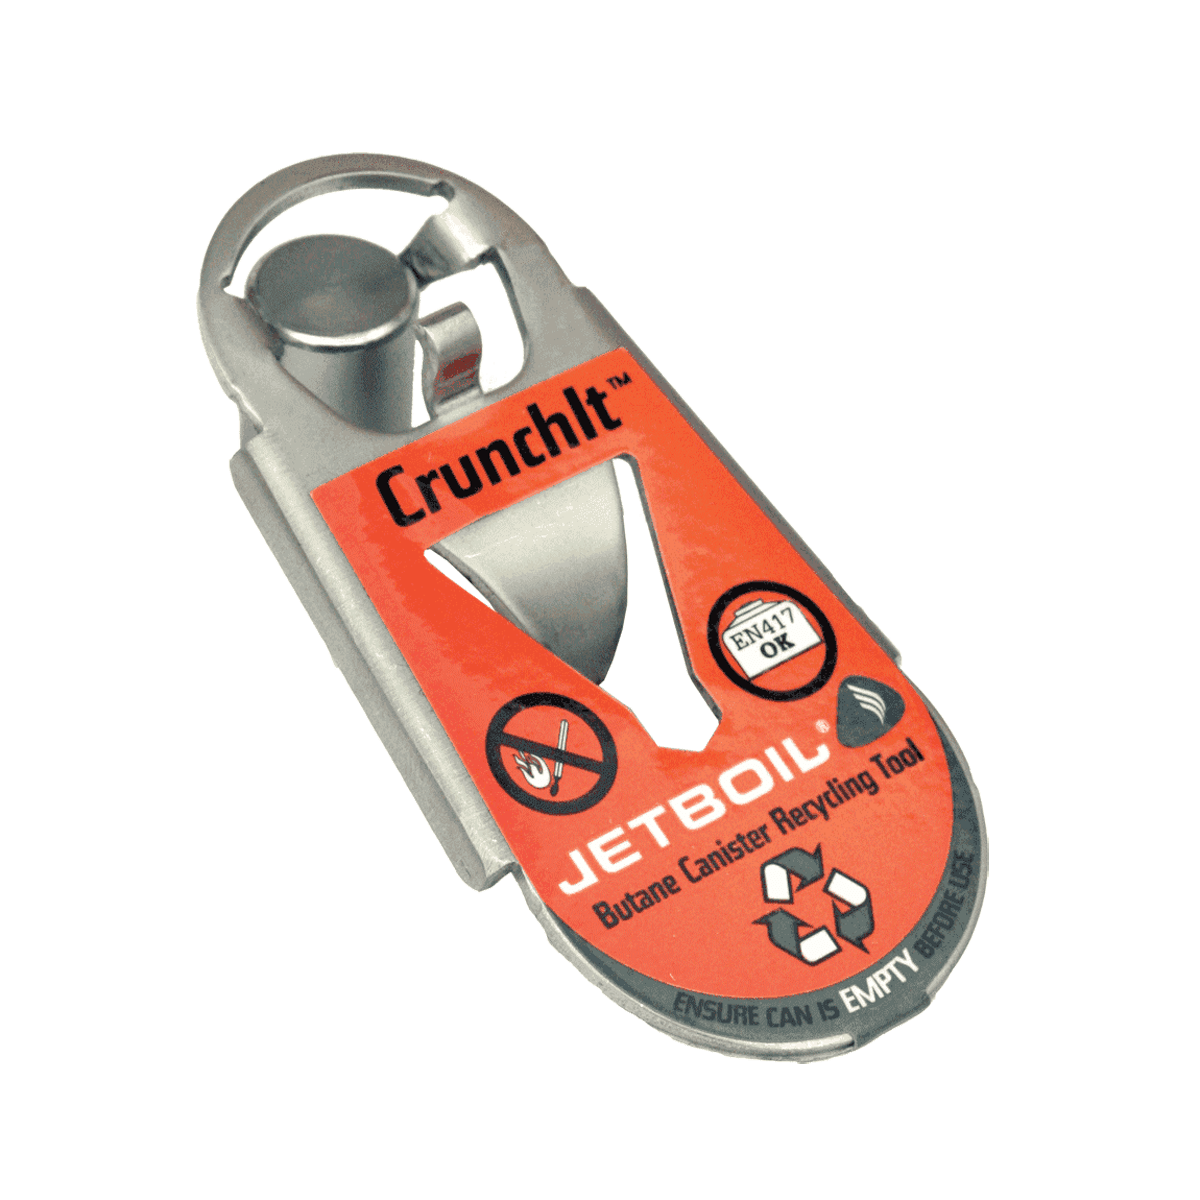 Crunch It Fuel Canister Recycling Tool